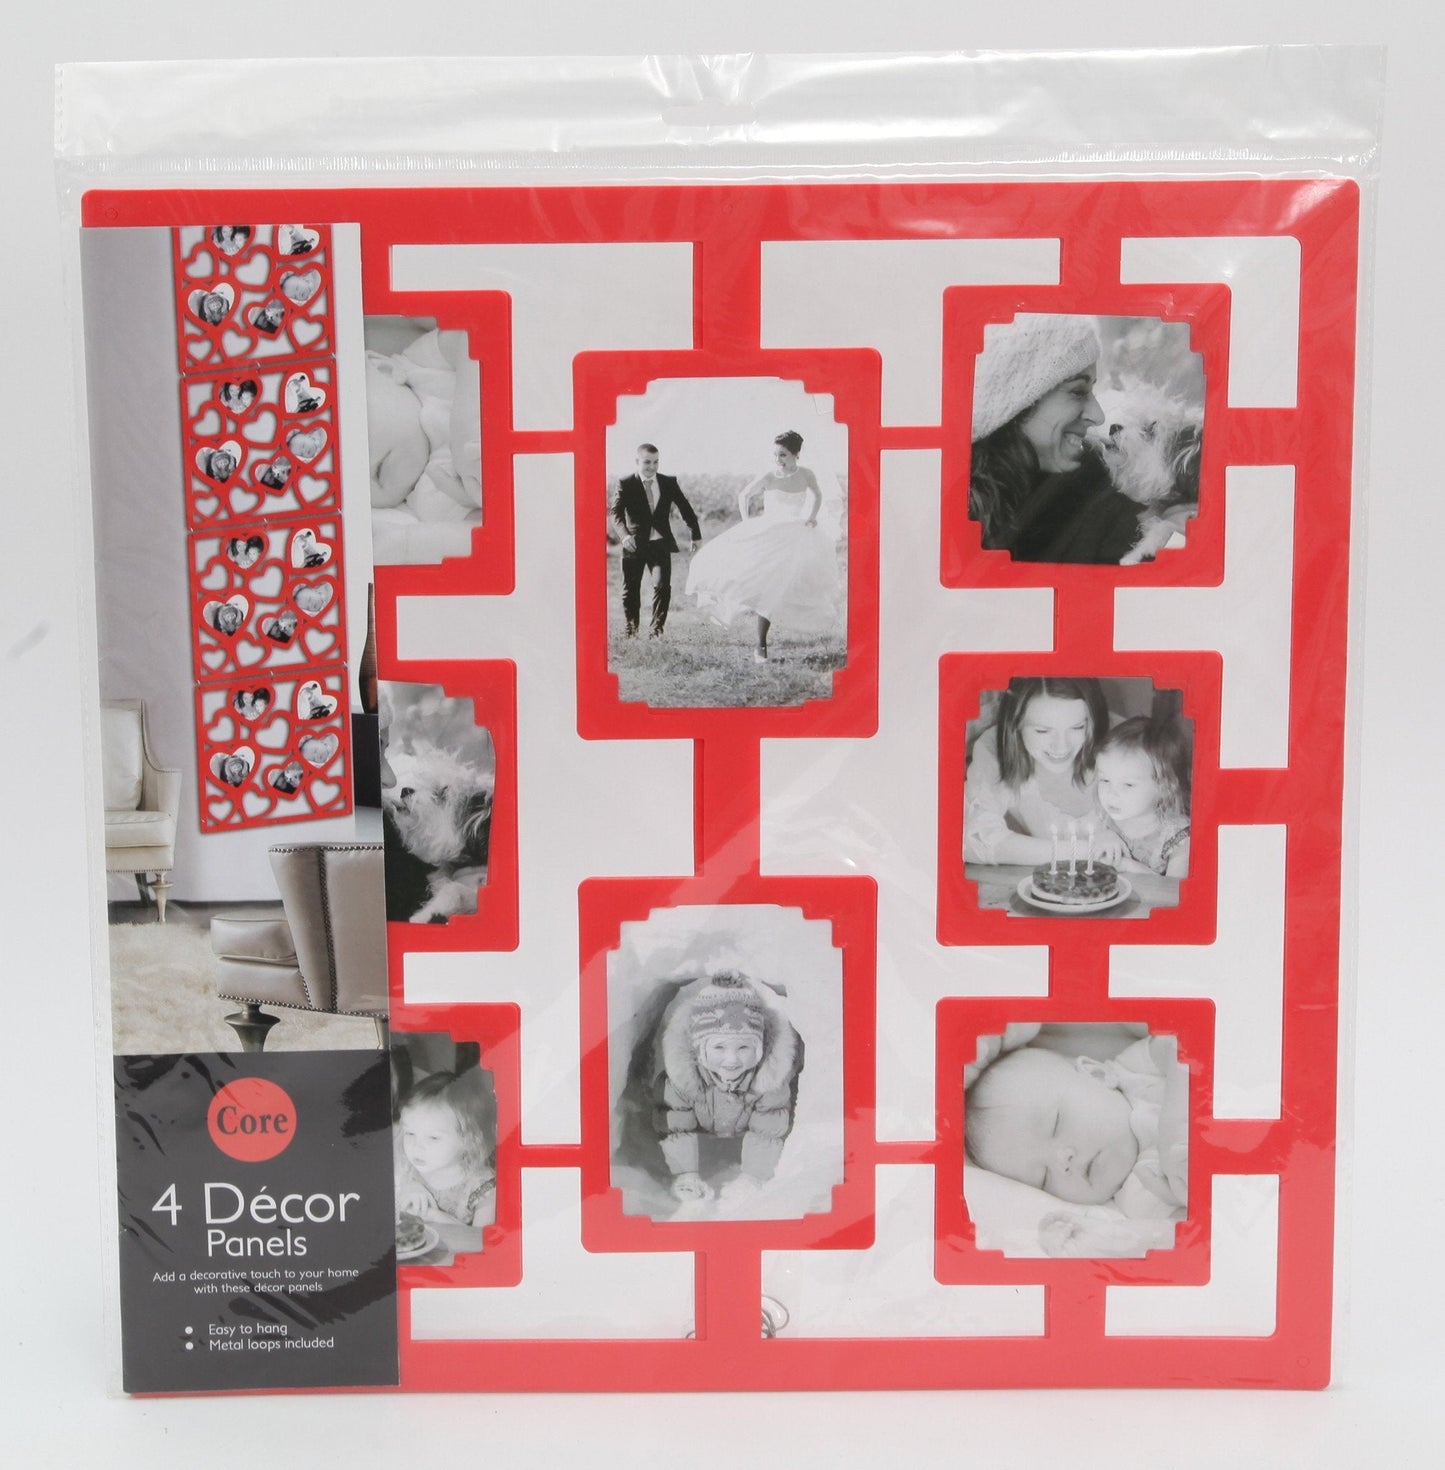 Multi Decor Panel Wall Photo Frame Assorted Designs and Colours 2335 (Parcel Rate)